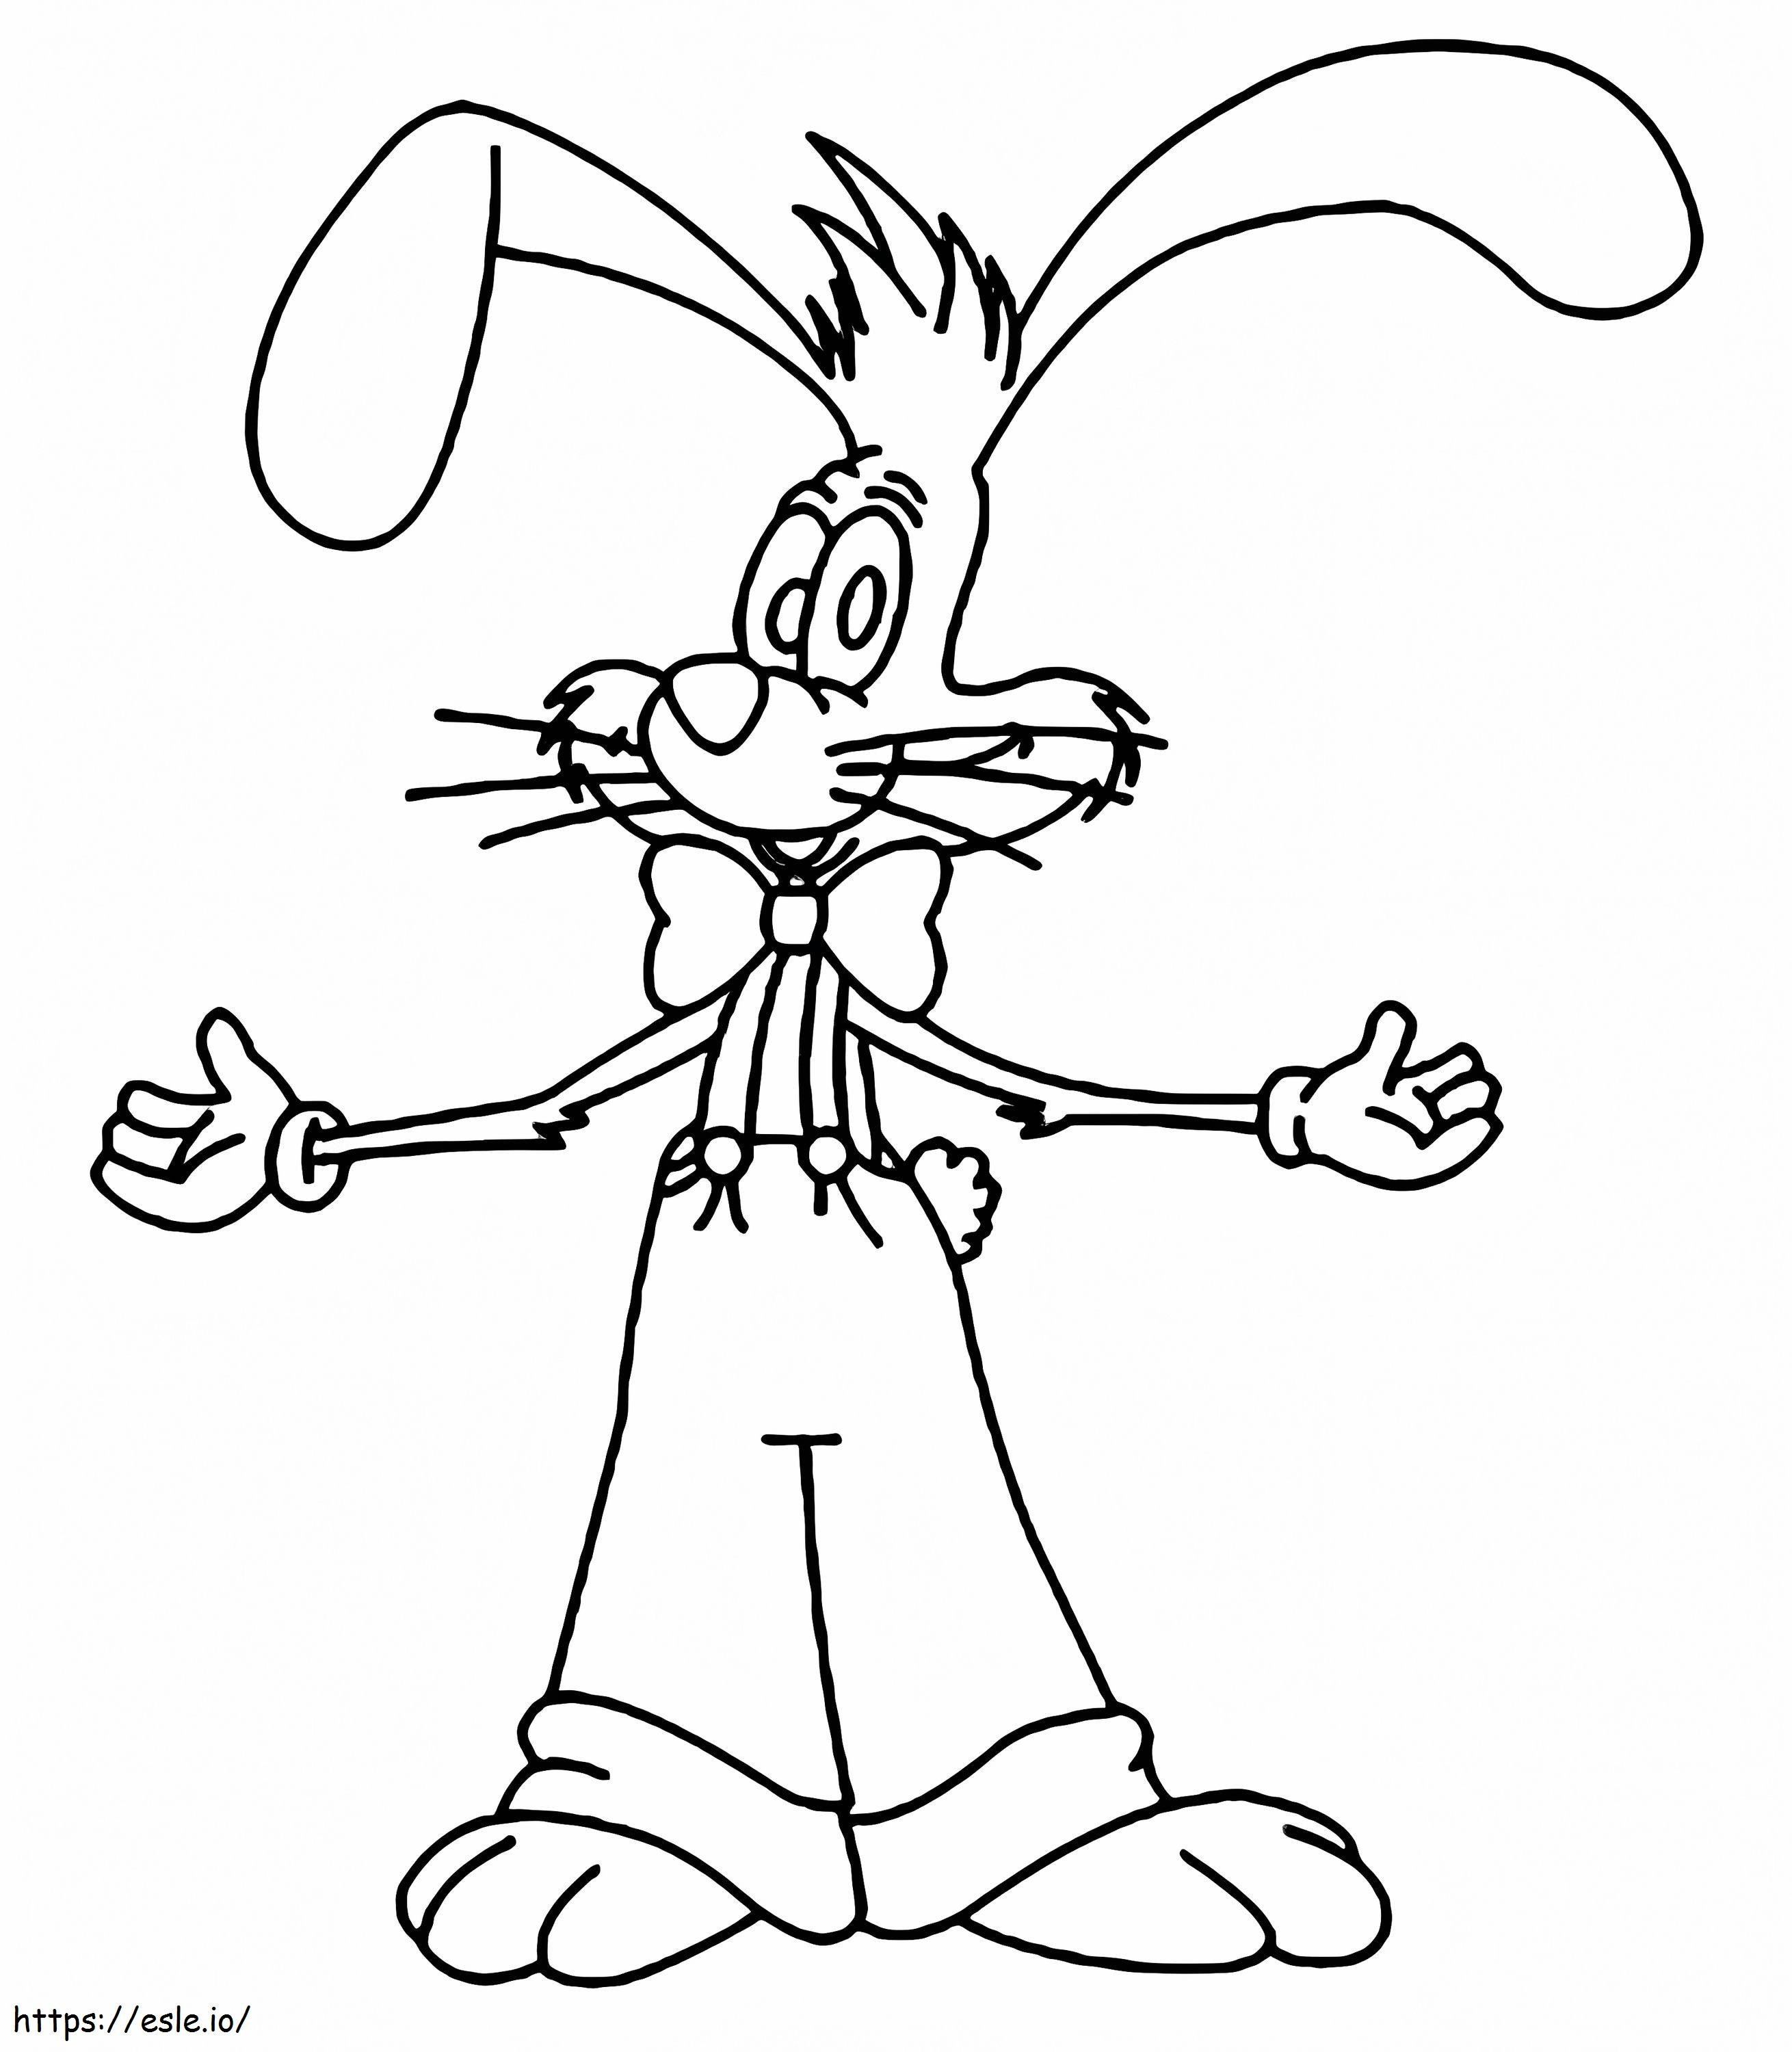 Roger Rabbit Printable coloring page